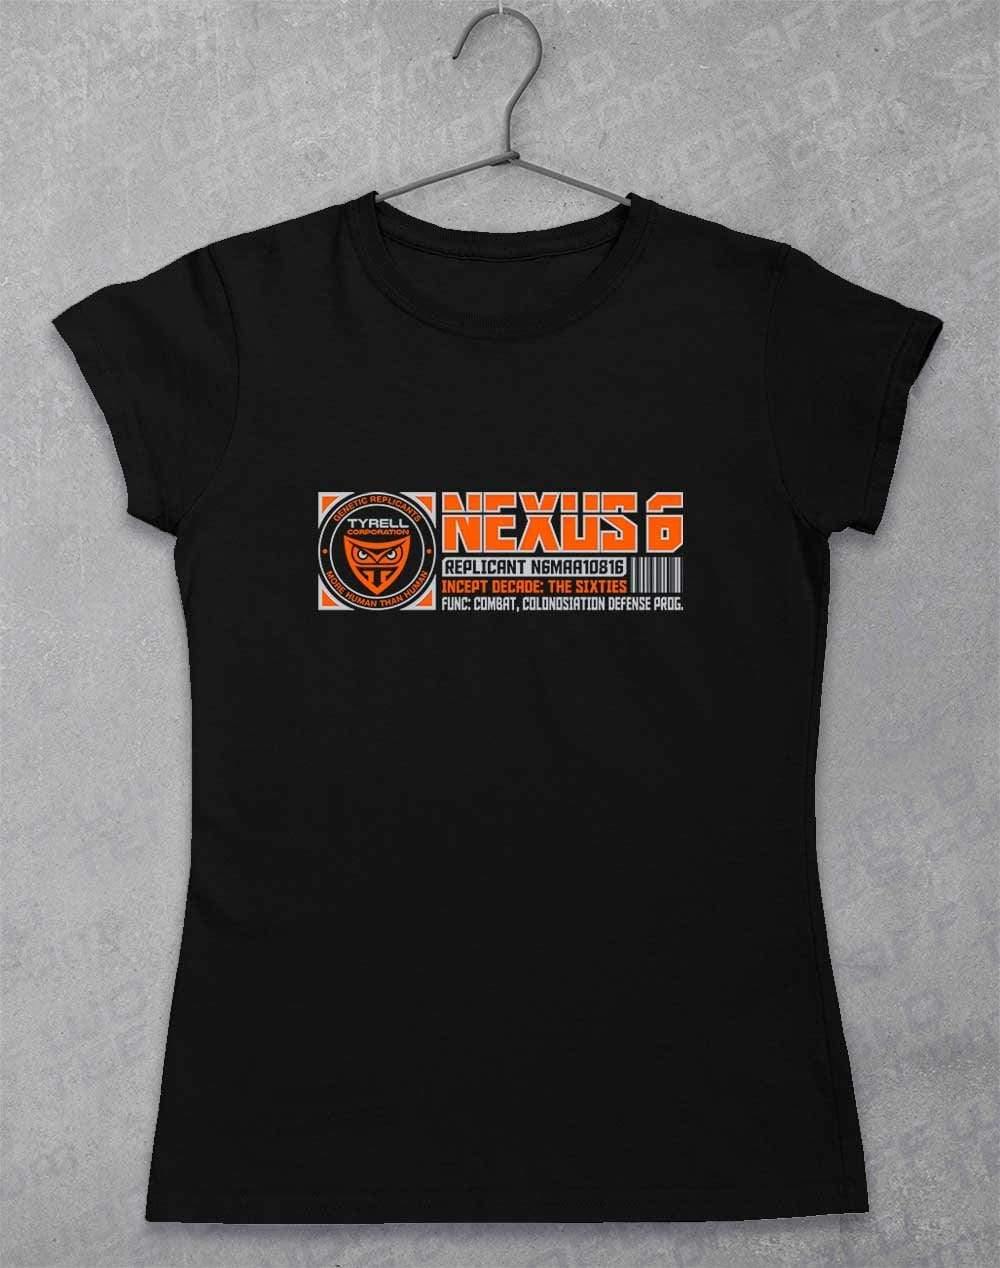 Nexus 6 Replicant Incept Date (CHOOSE YOUR DECADE!) Women's T-Shirt The Sixties - Black / 8-10  - Off World Tees